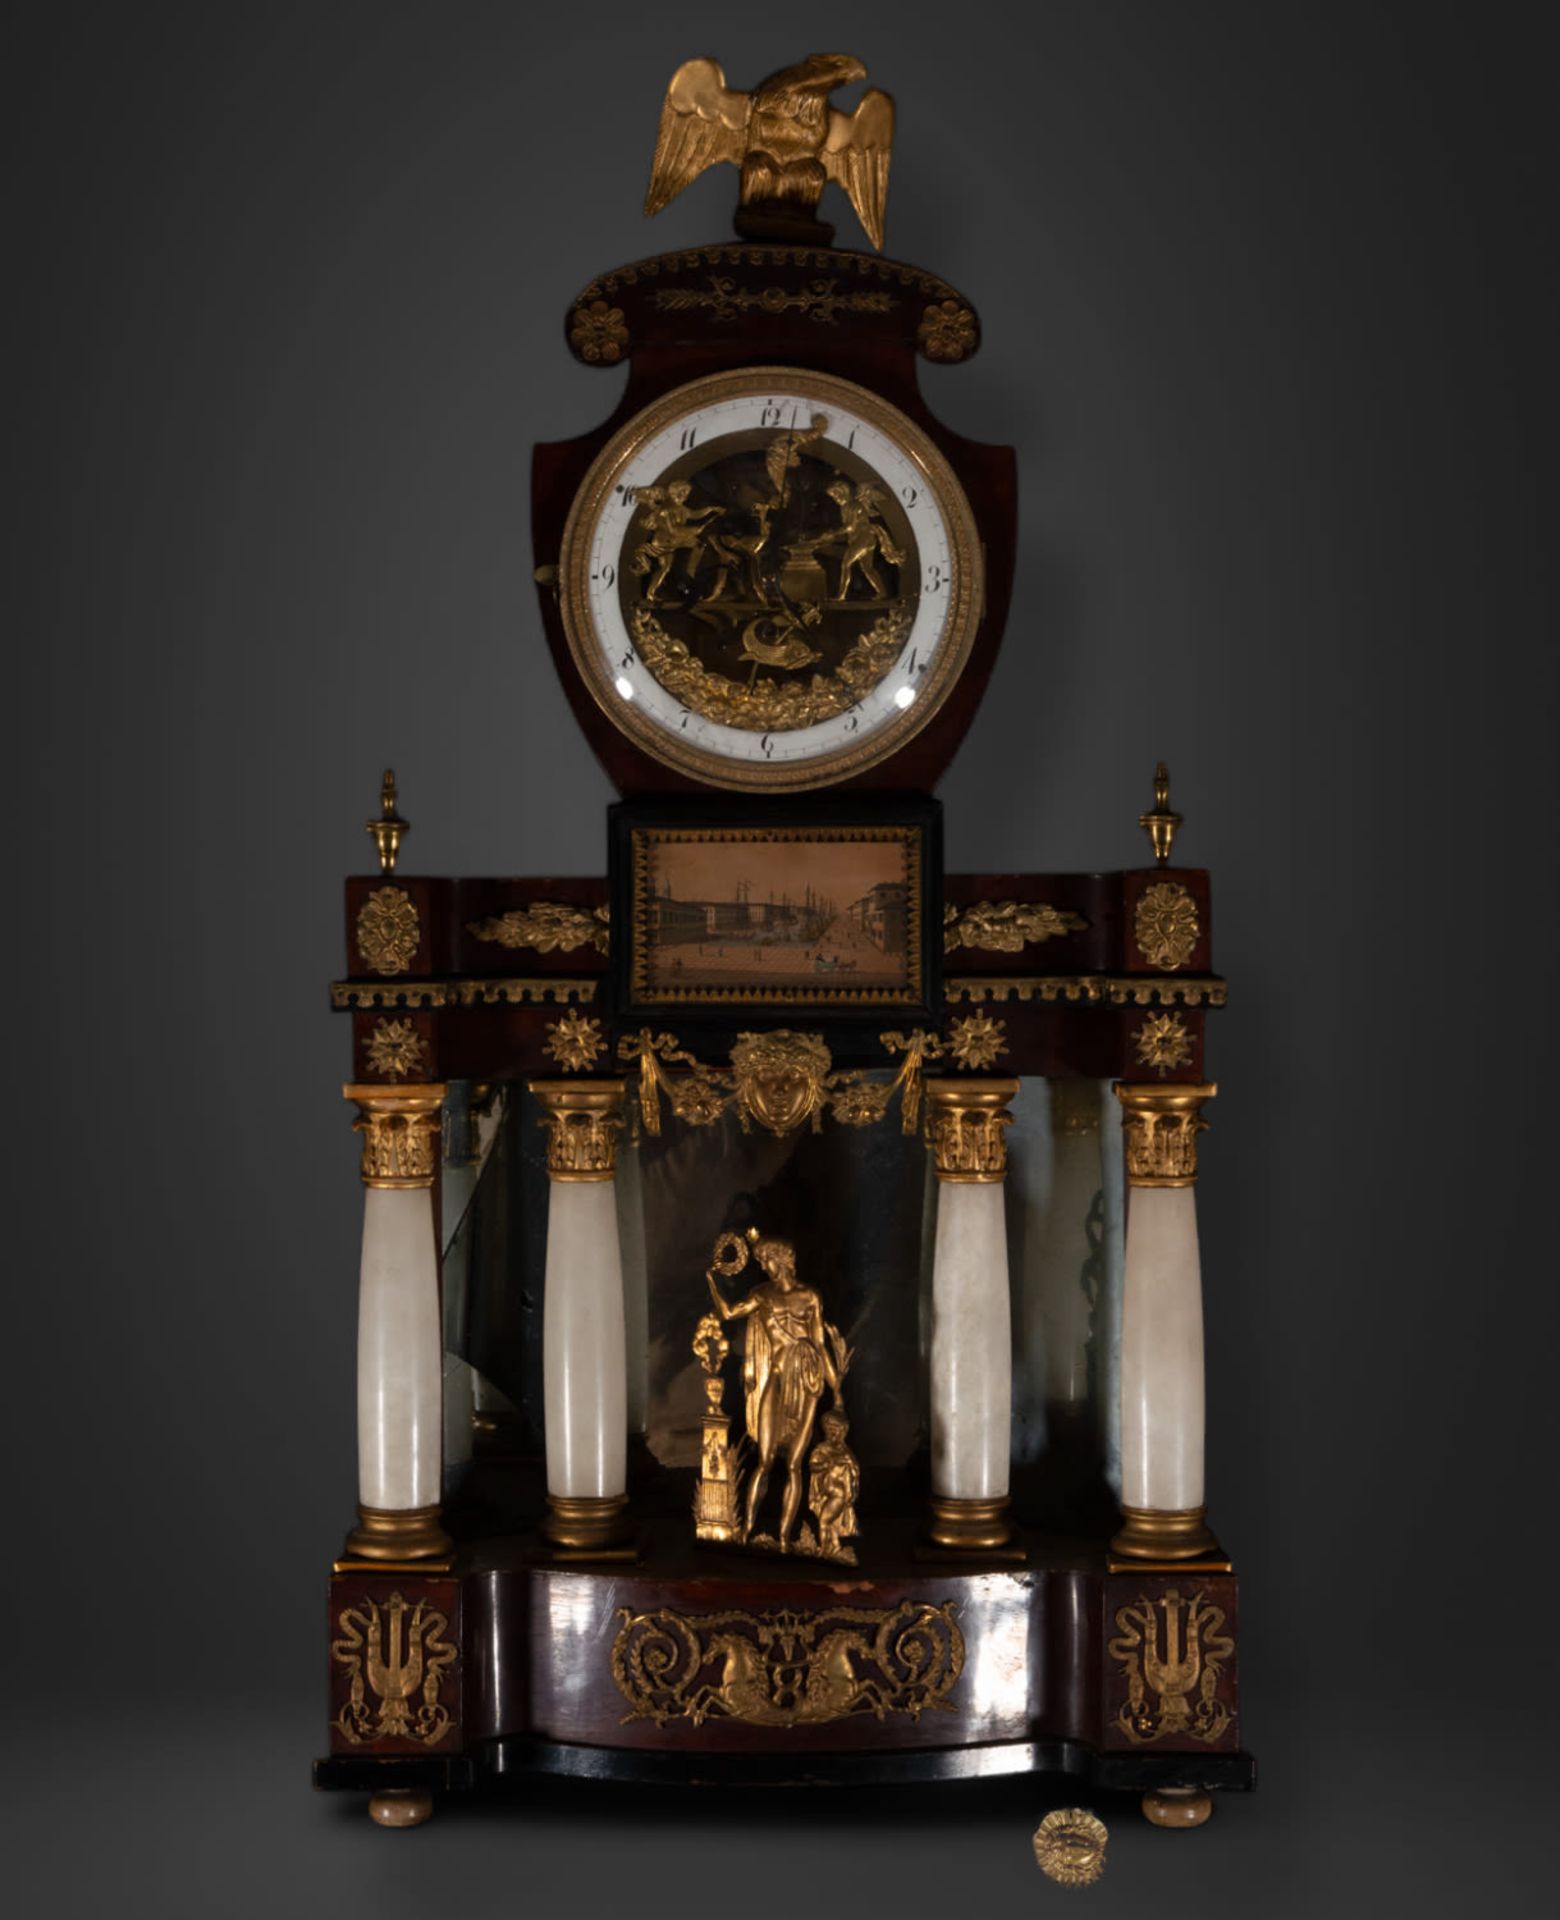 Large and Exquisite Bilderrahmen Table Clock with Automata from the late 19th century, Austria - Image 2 of 15